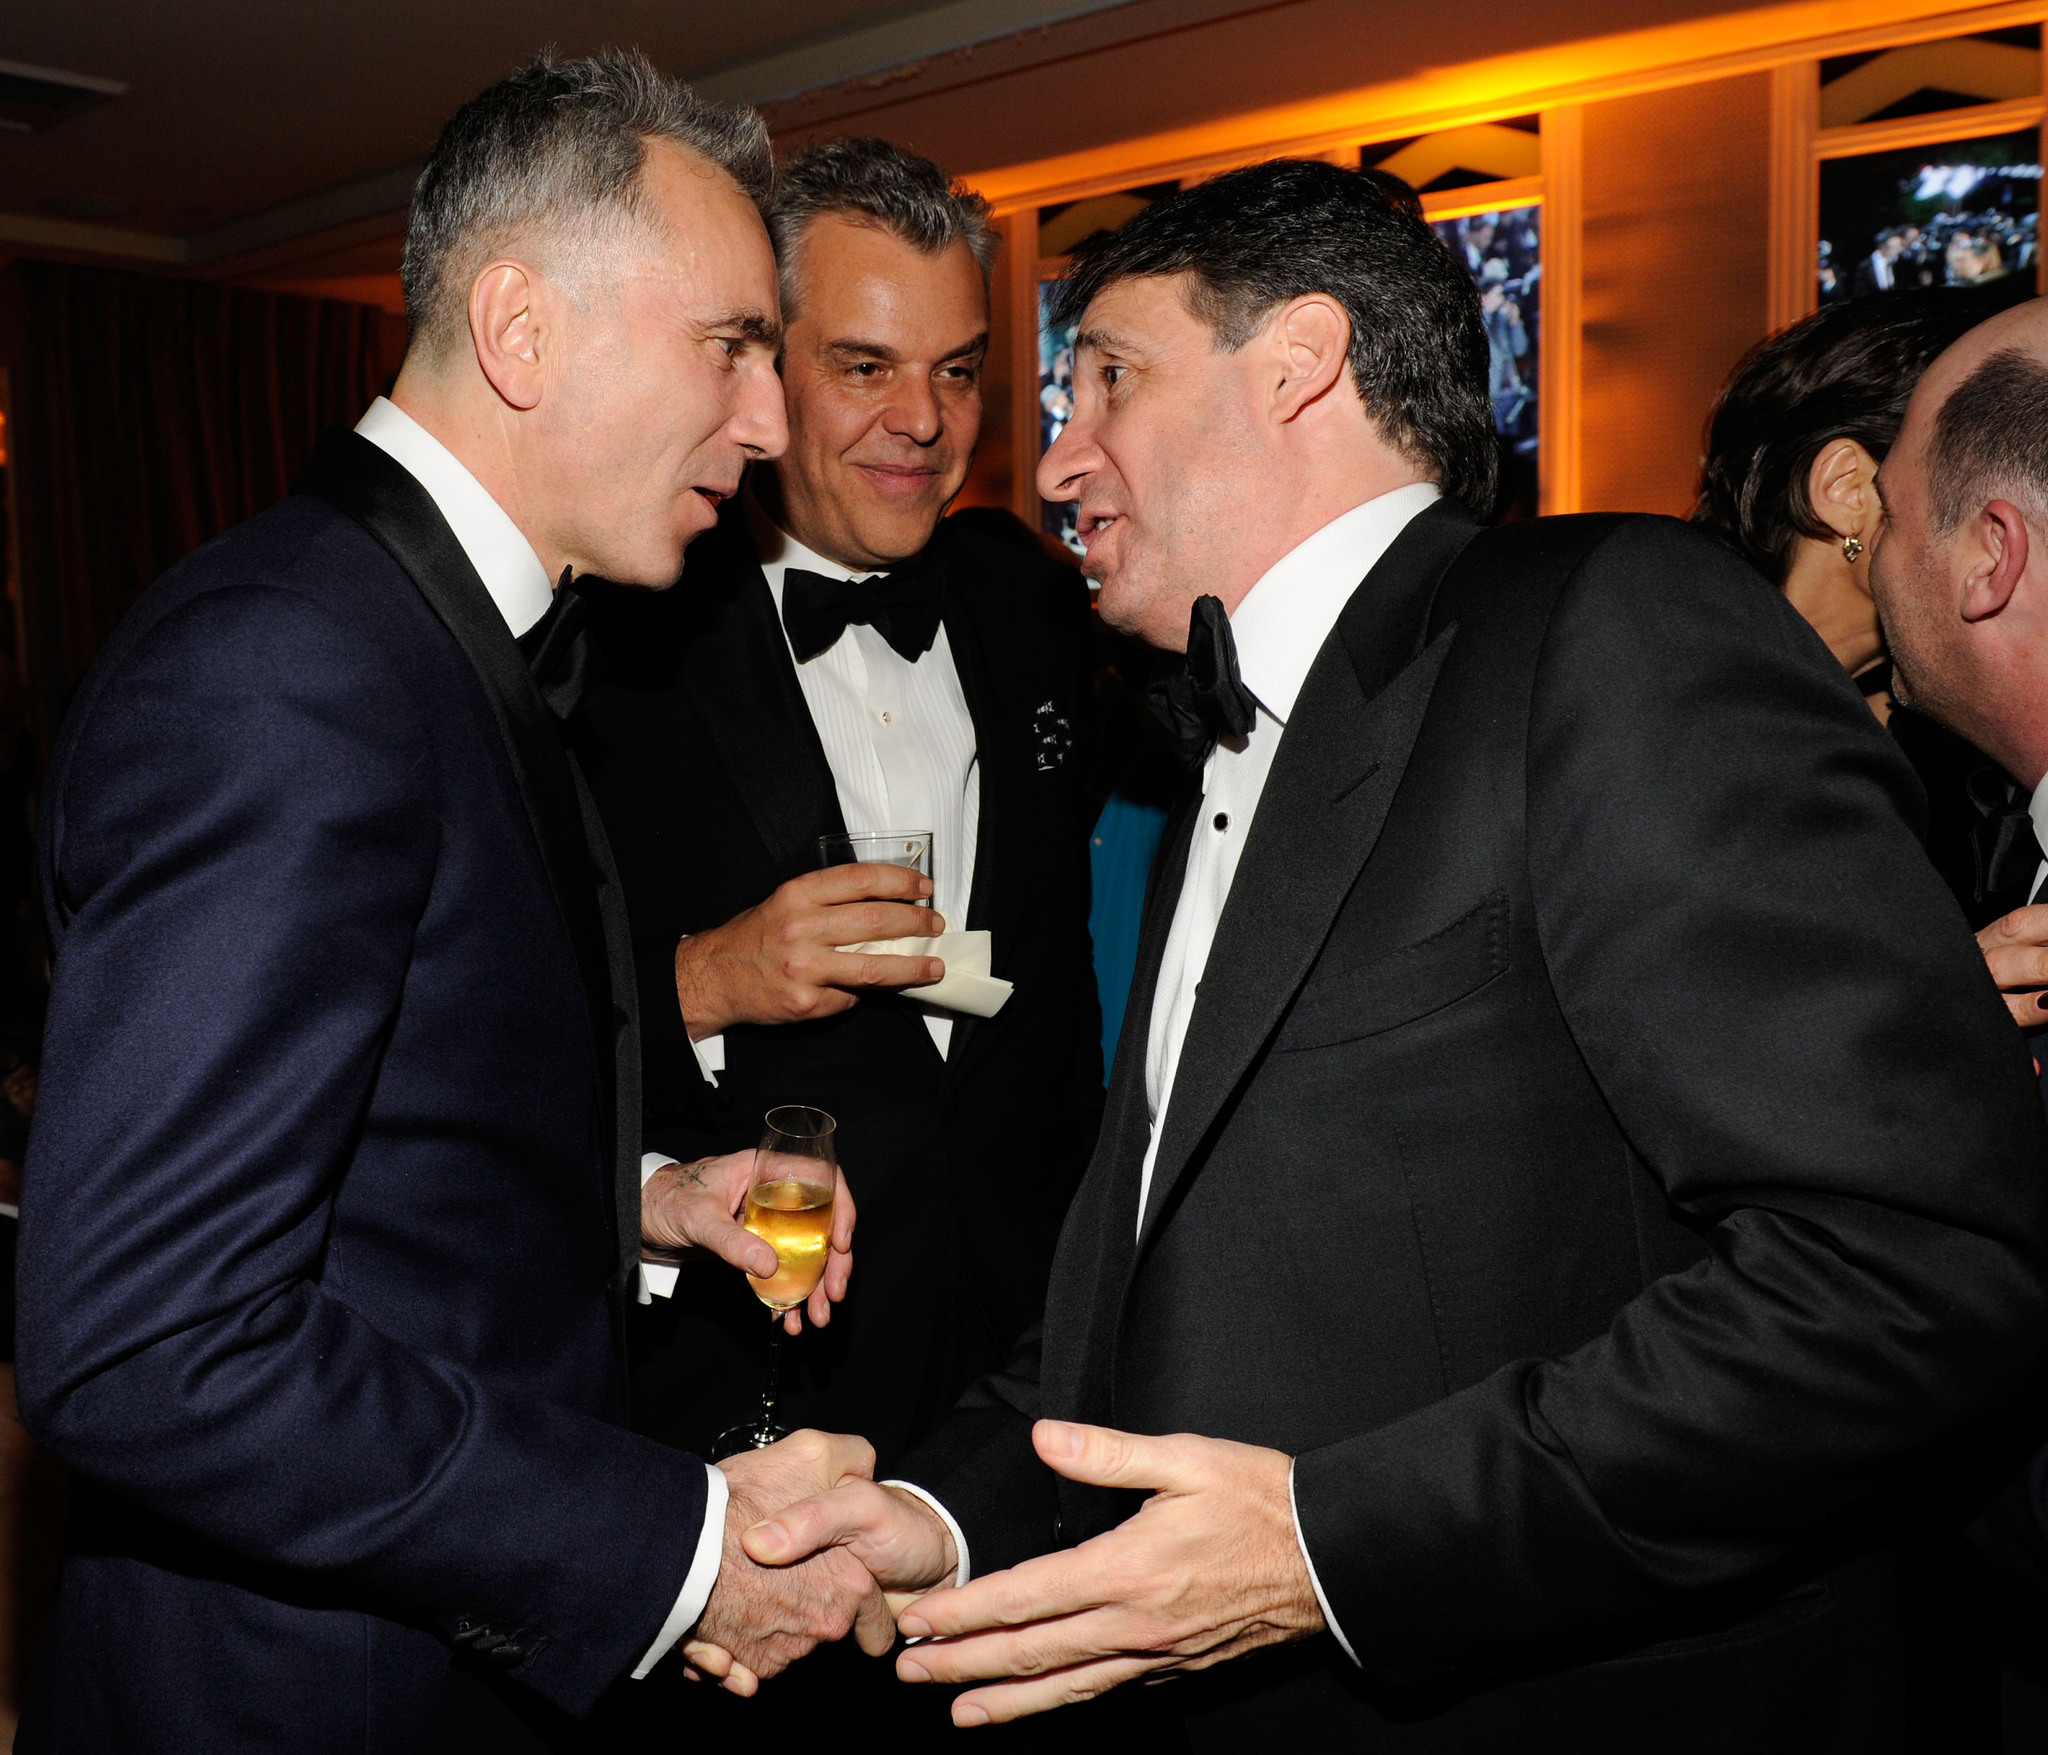 Daniel Day-Lewis, Danny Huston and and Co-Founder and Chief Executive Officer of Getty Images, Inc. Jonathan Klein attend the 2013 Vanity Fair Oscar Party hosted by Graydon Carter at Sunset Tower on February 24, 2013 in West Hollywood, California.